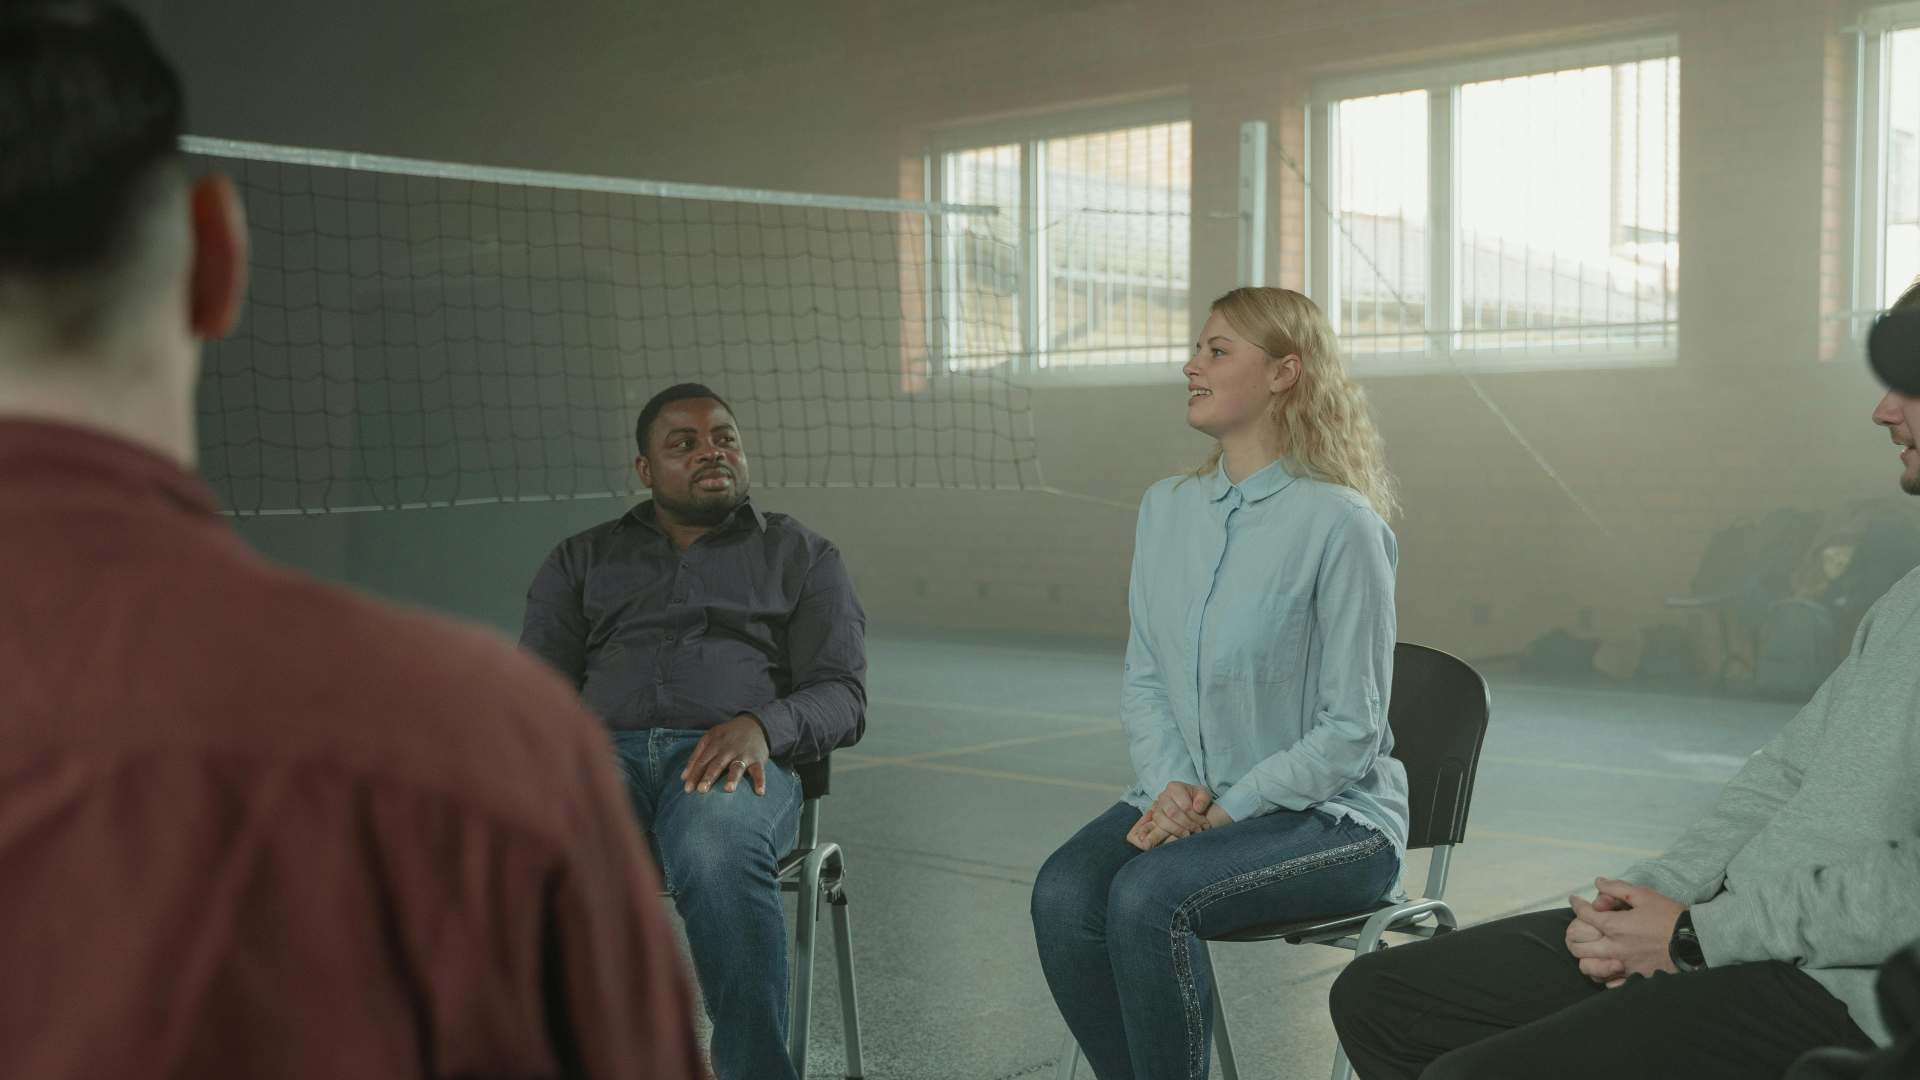 dark skinned man listens attentively to young blond woman sharing with circle of seated people